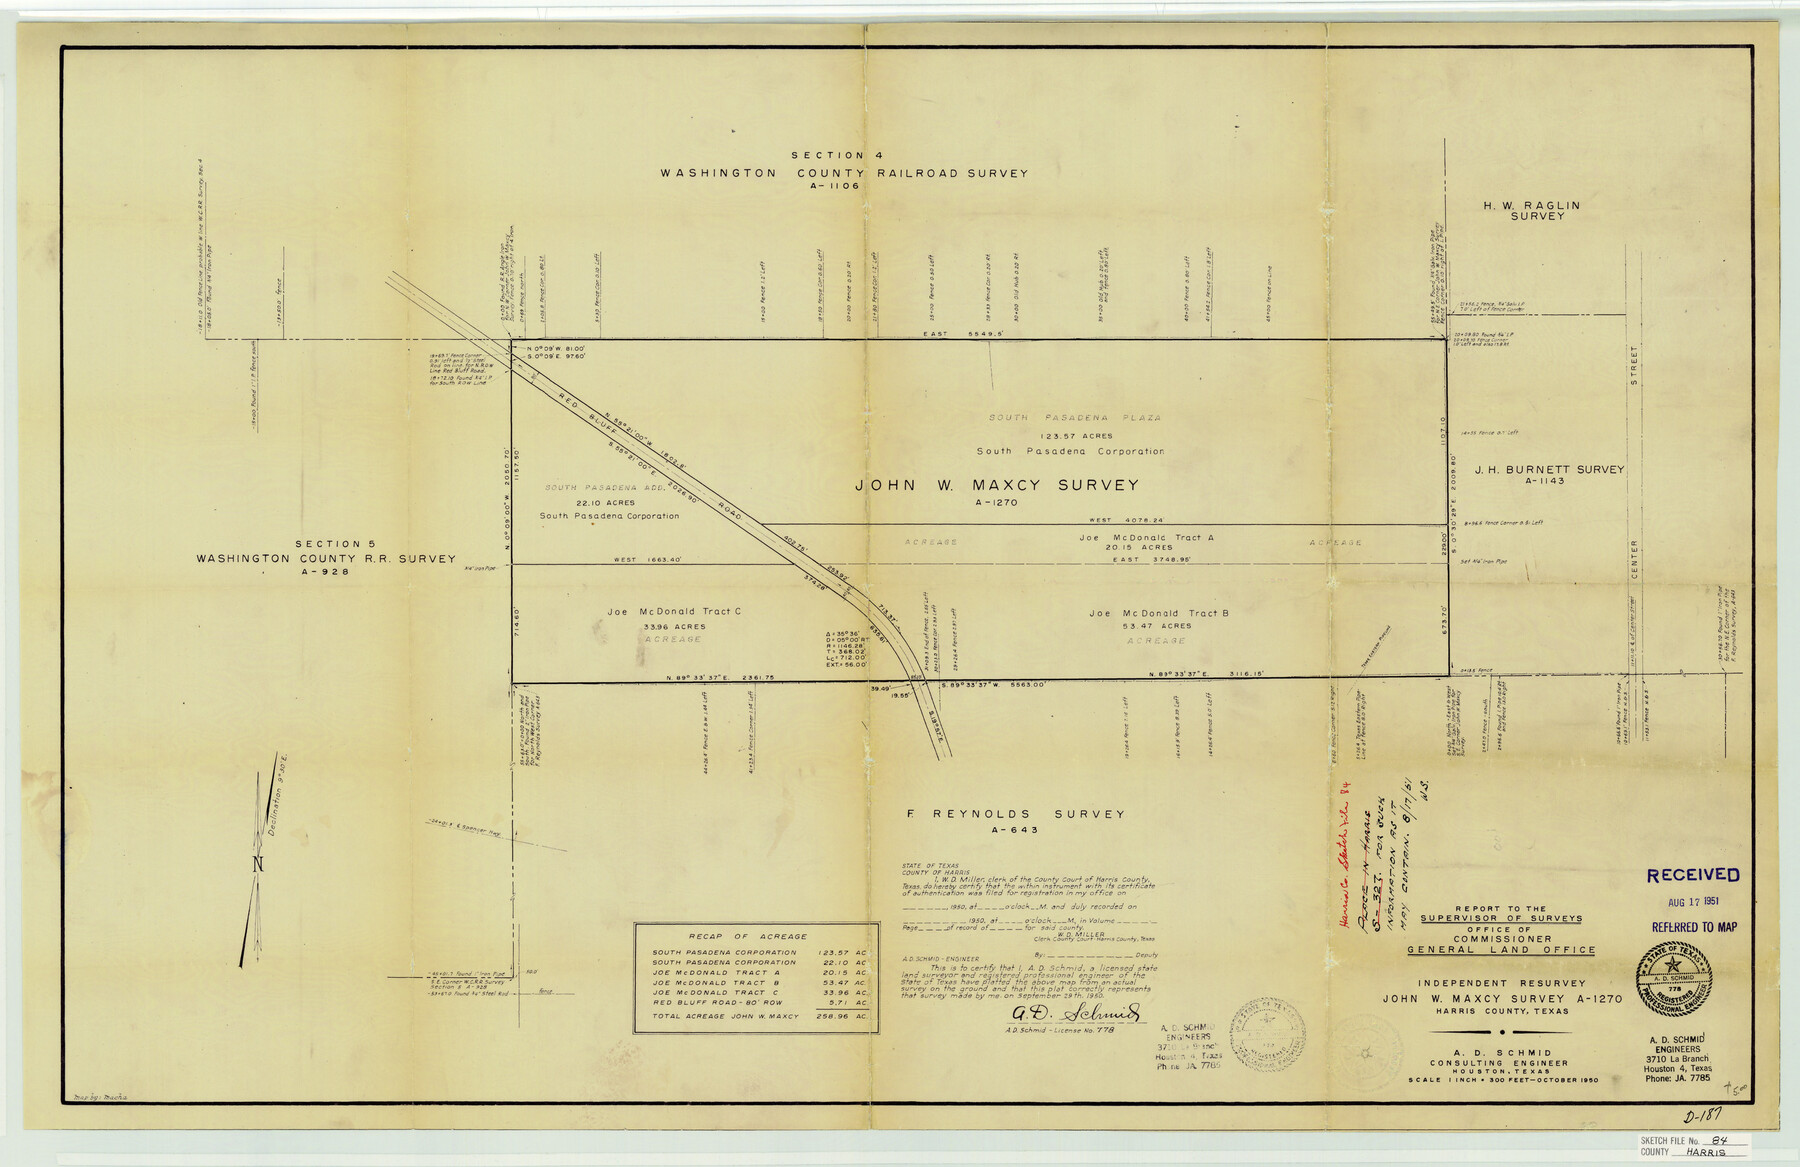 11672, Harris County Sketch File 84, General Map Collection